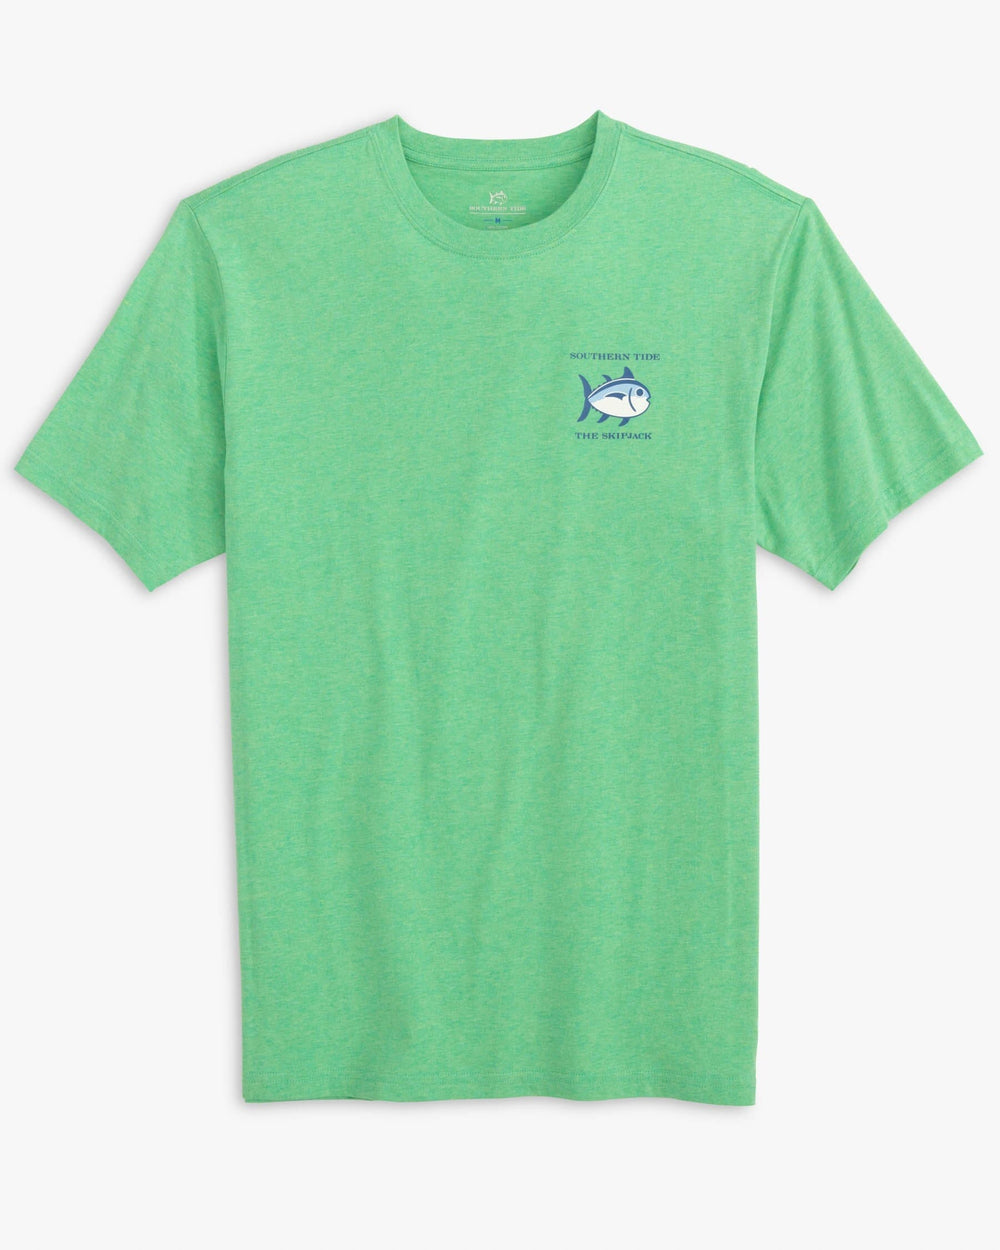 The front view of the Southern Tide Heather Original Skipjack T-Shirt 2 by Southern Tide - Heather Mint